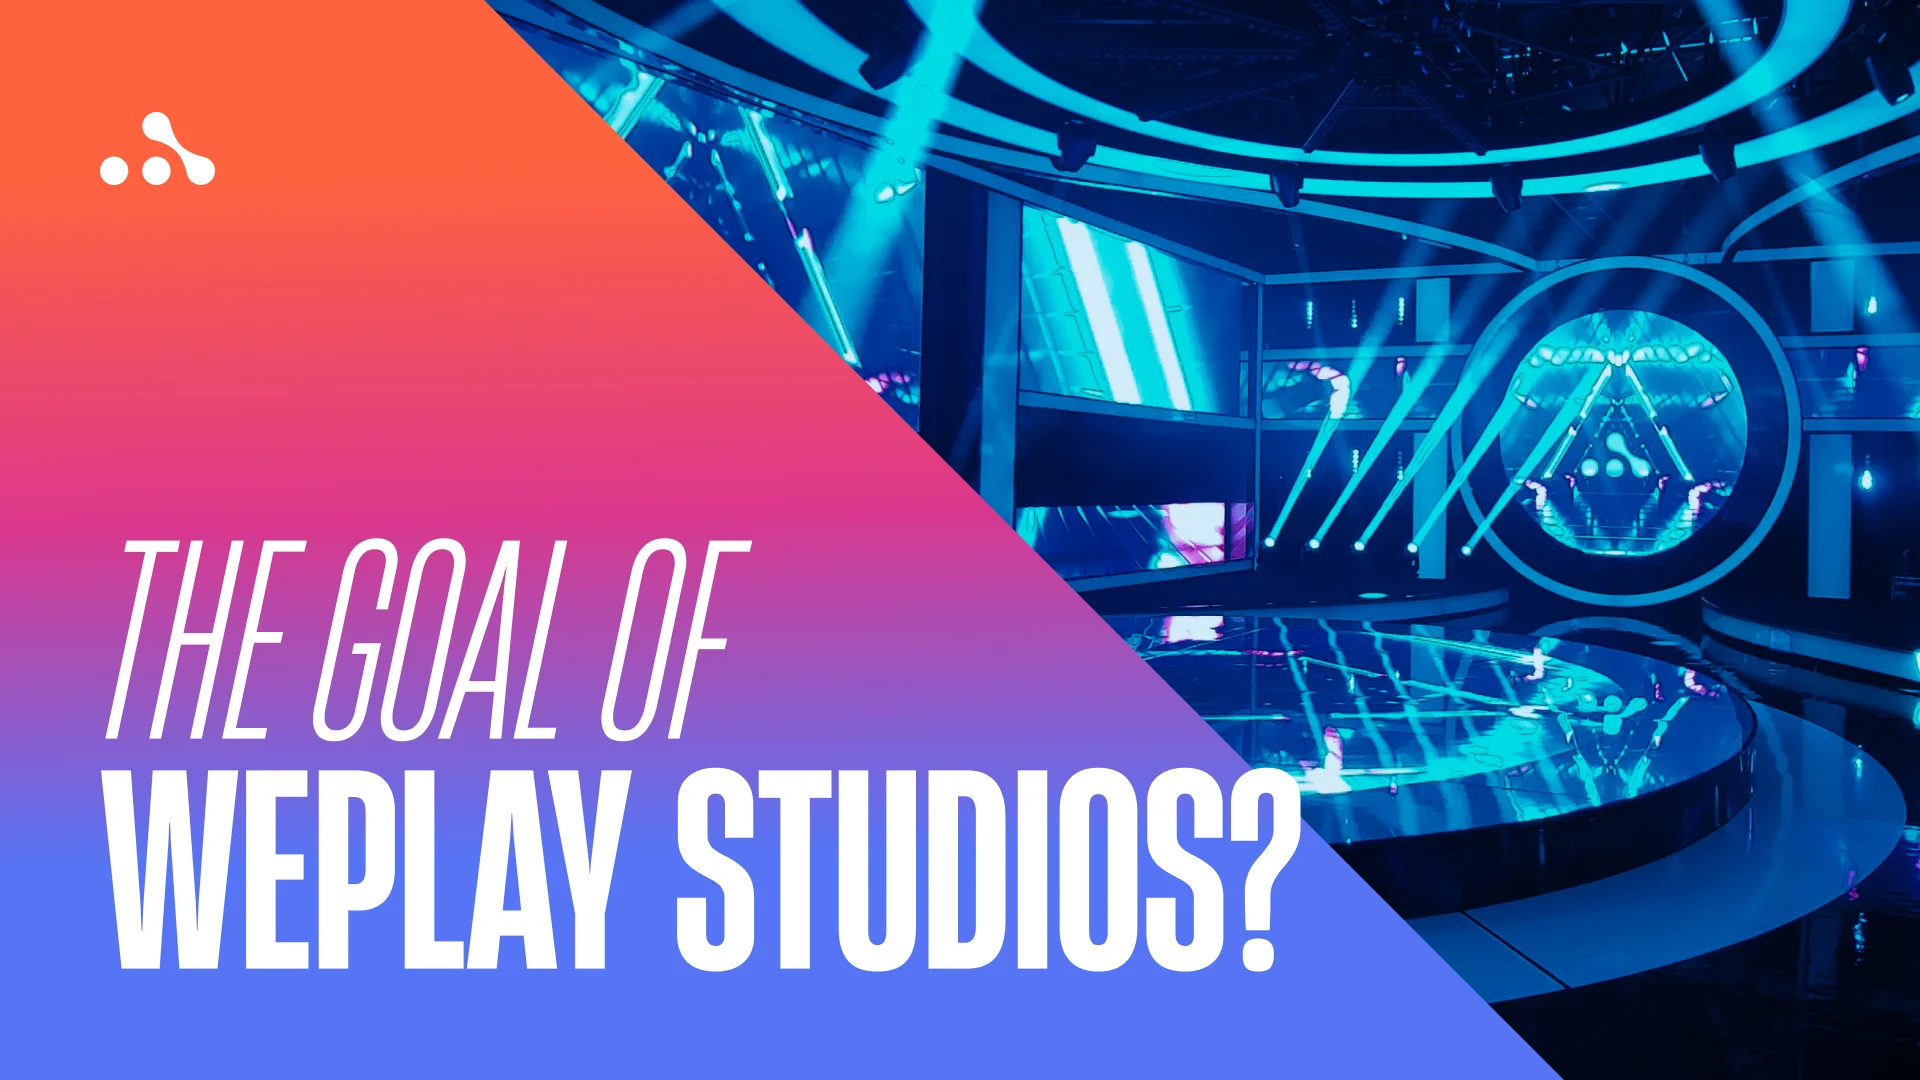 The goal of WePlay Studios. Credit: WePlay Holding